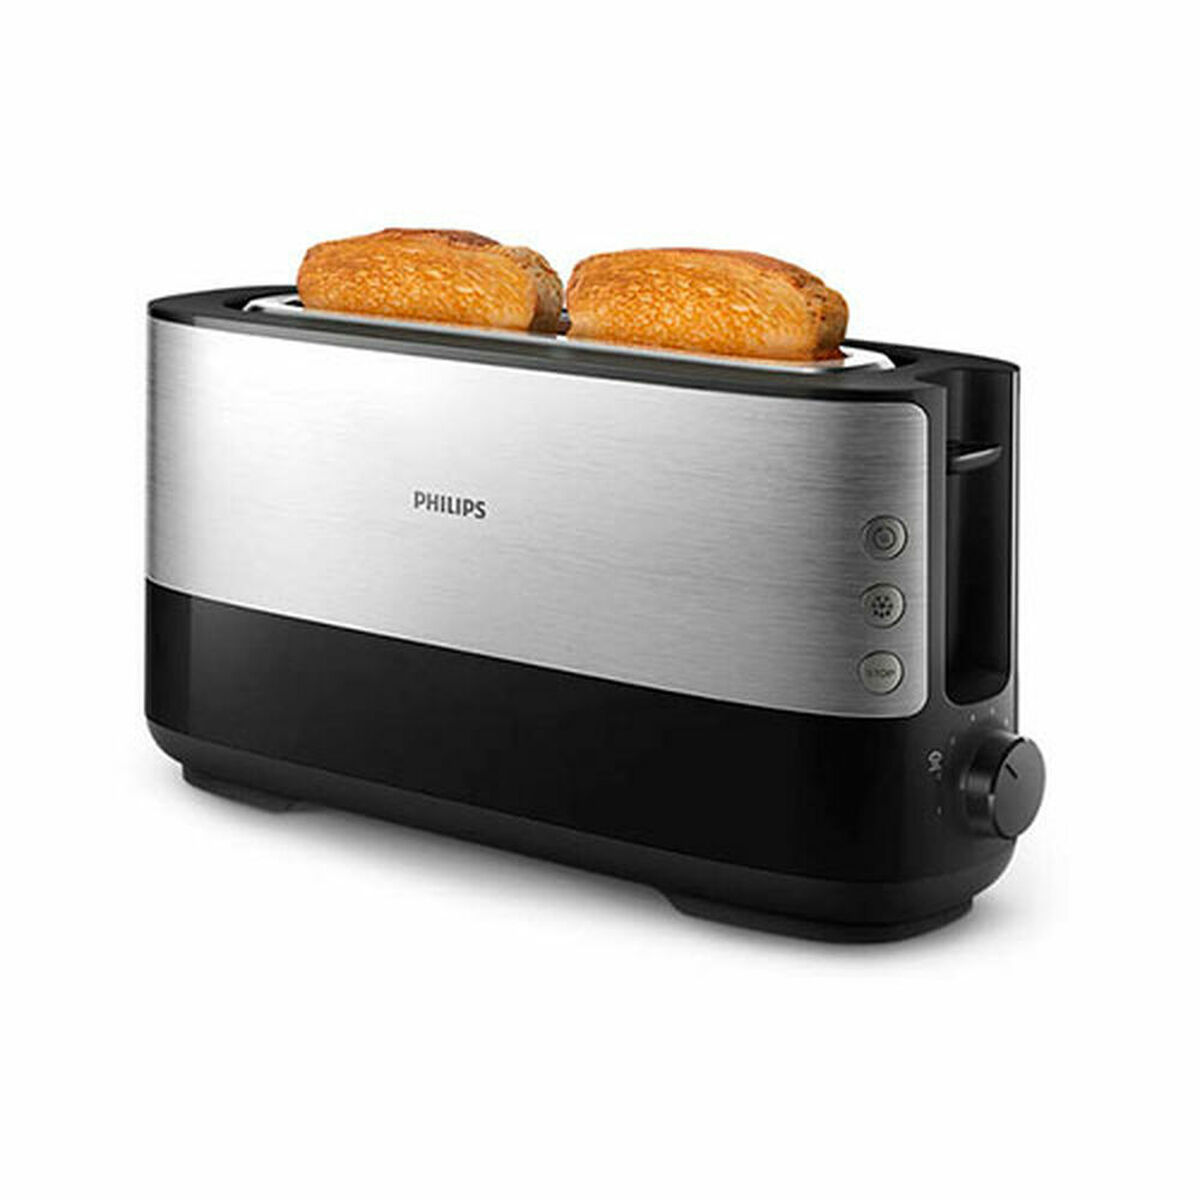 Toaster Philips Viva Collection 1030W